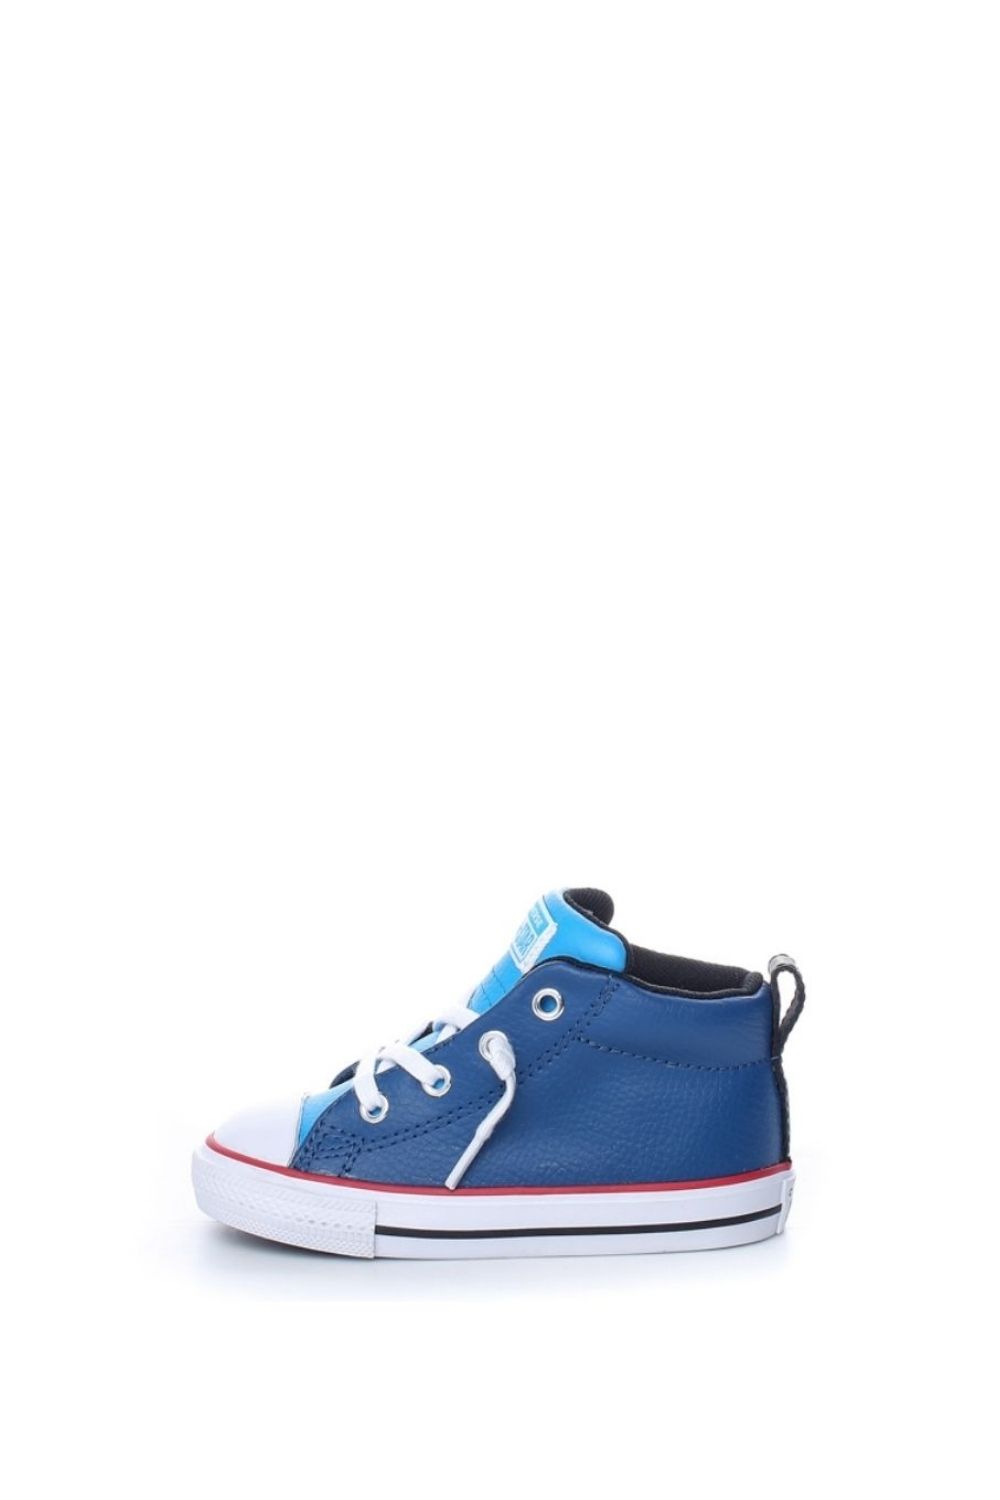 CONVERSE - Βρεφικά ψηλά sneakers CONVERSE Chuck Taylor All Star Street μπλε Παιδικά/Baby/Παπούτσια/Sneakers